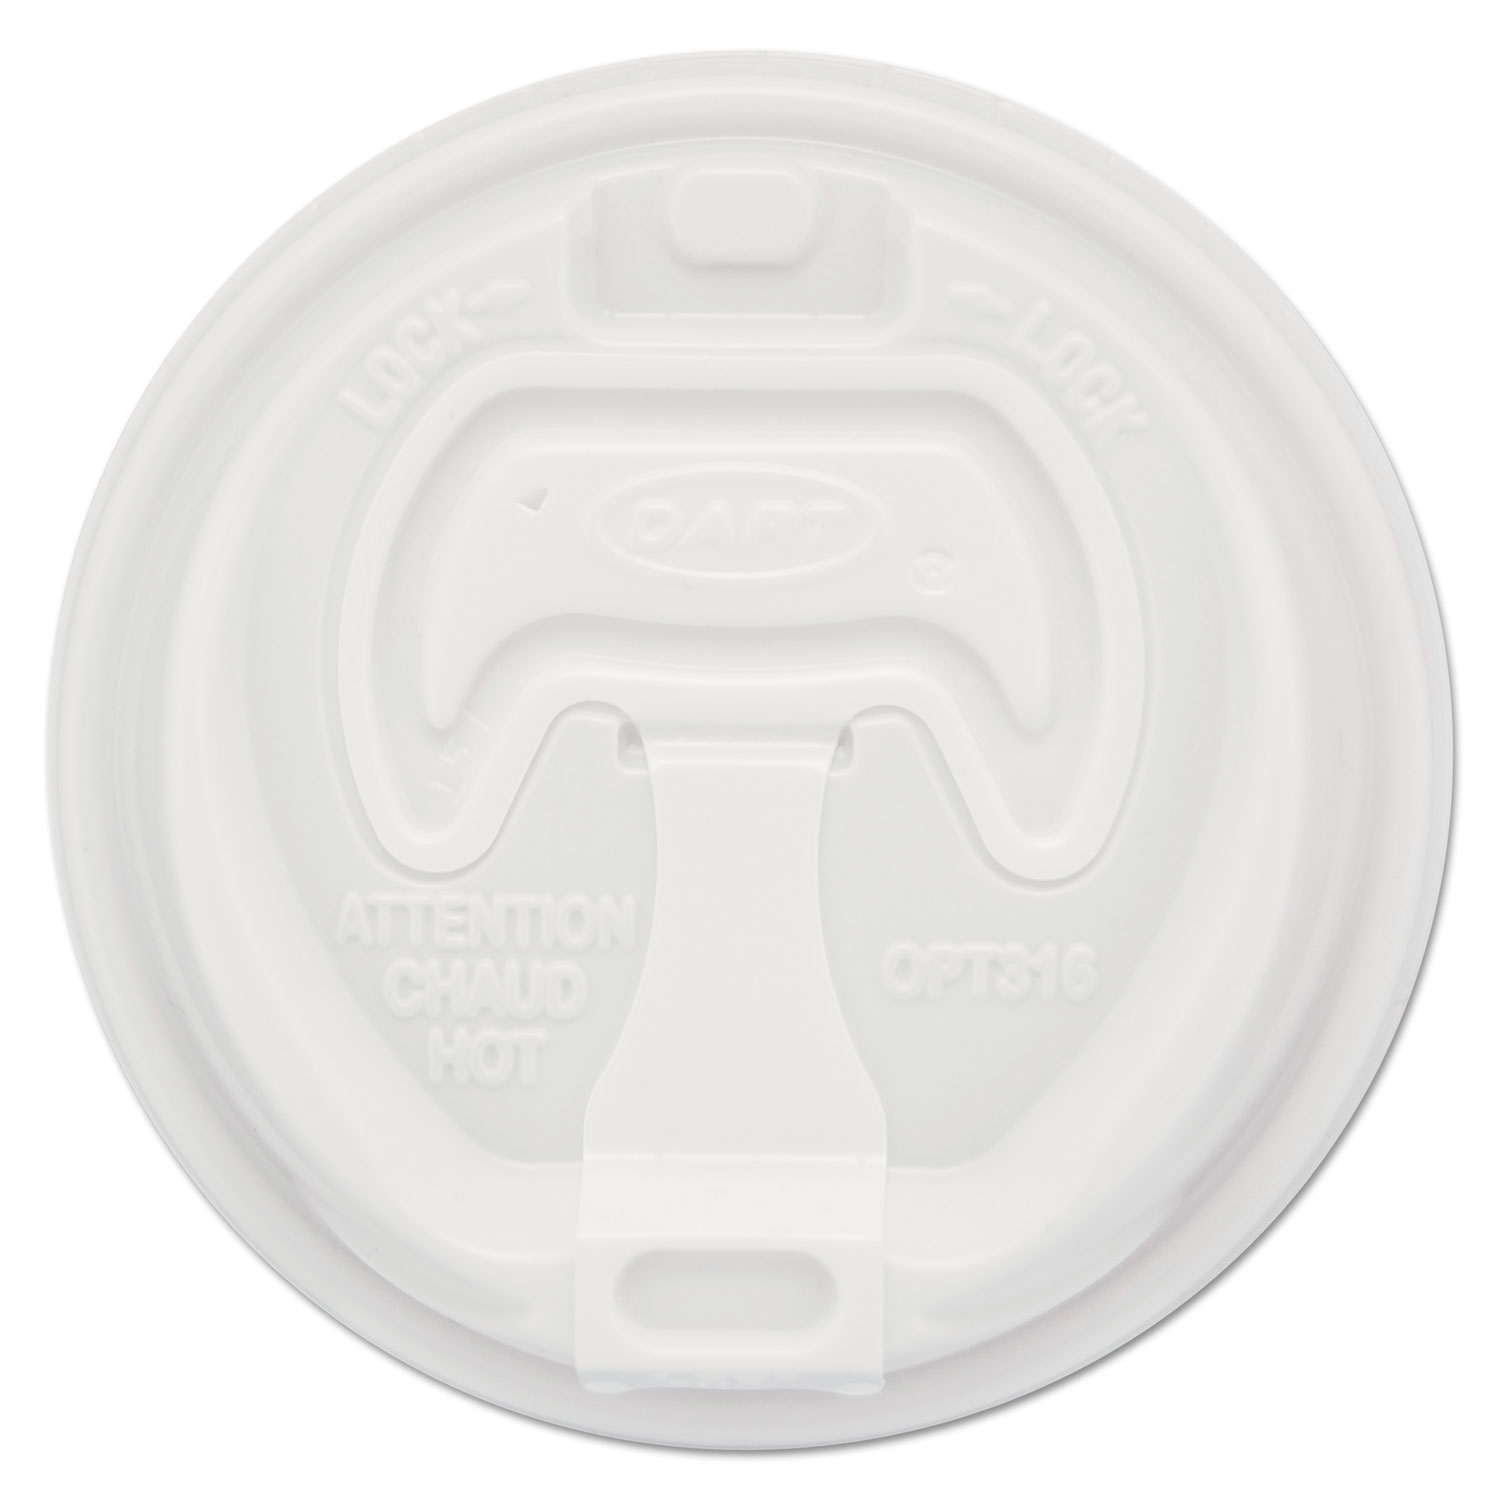 Optima Reclosable Lids for Paper Hot Cups for 10-24 oz Cups, White, 1000/Carton